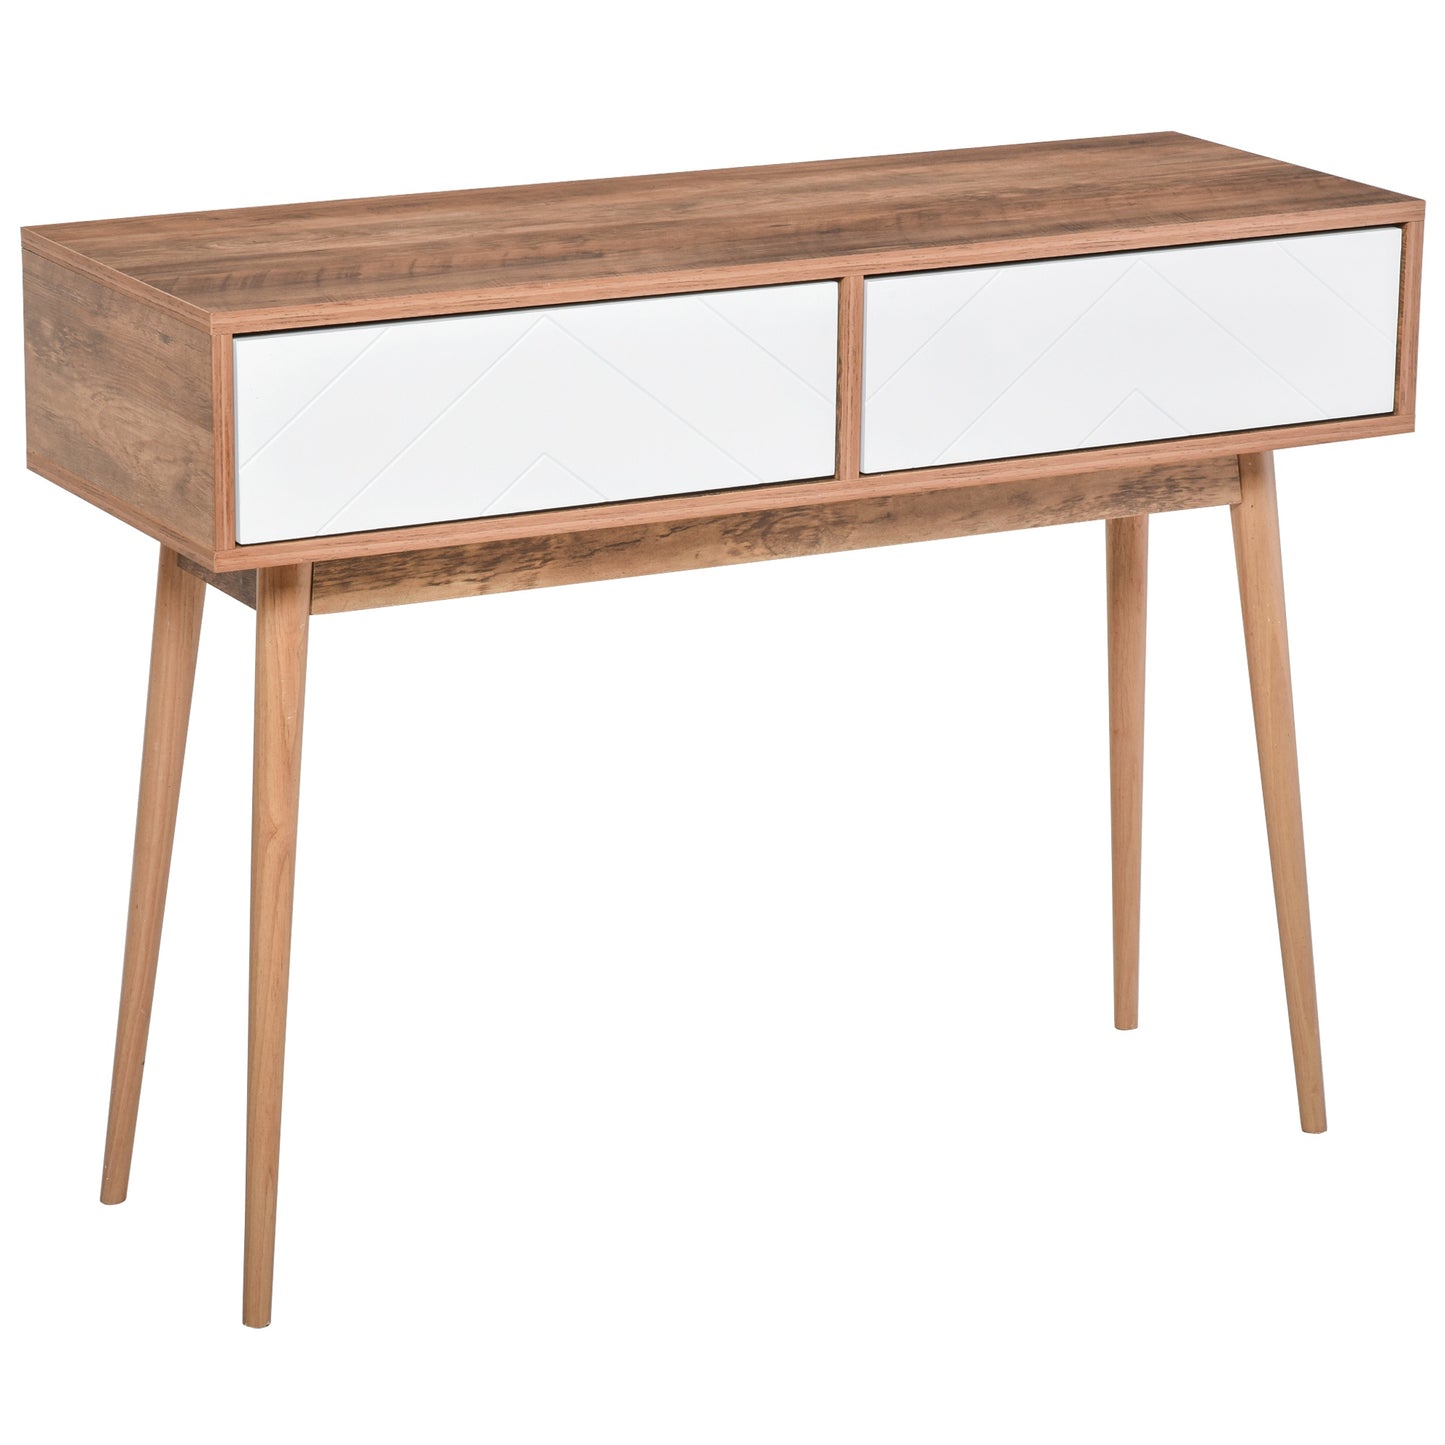 HOMCOM Console Table Sofa Side Desk with 2 Drawers Solid Pine Wood Legs for Entryway